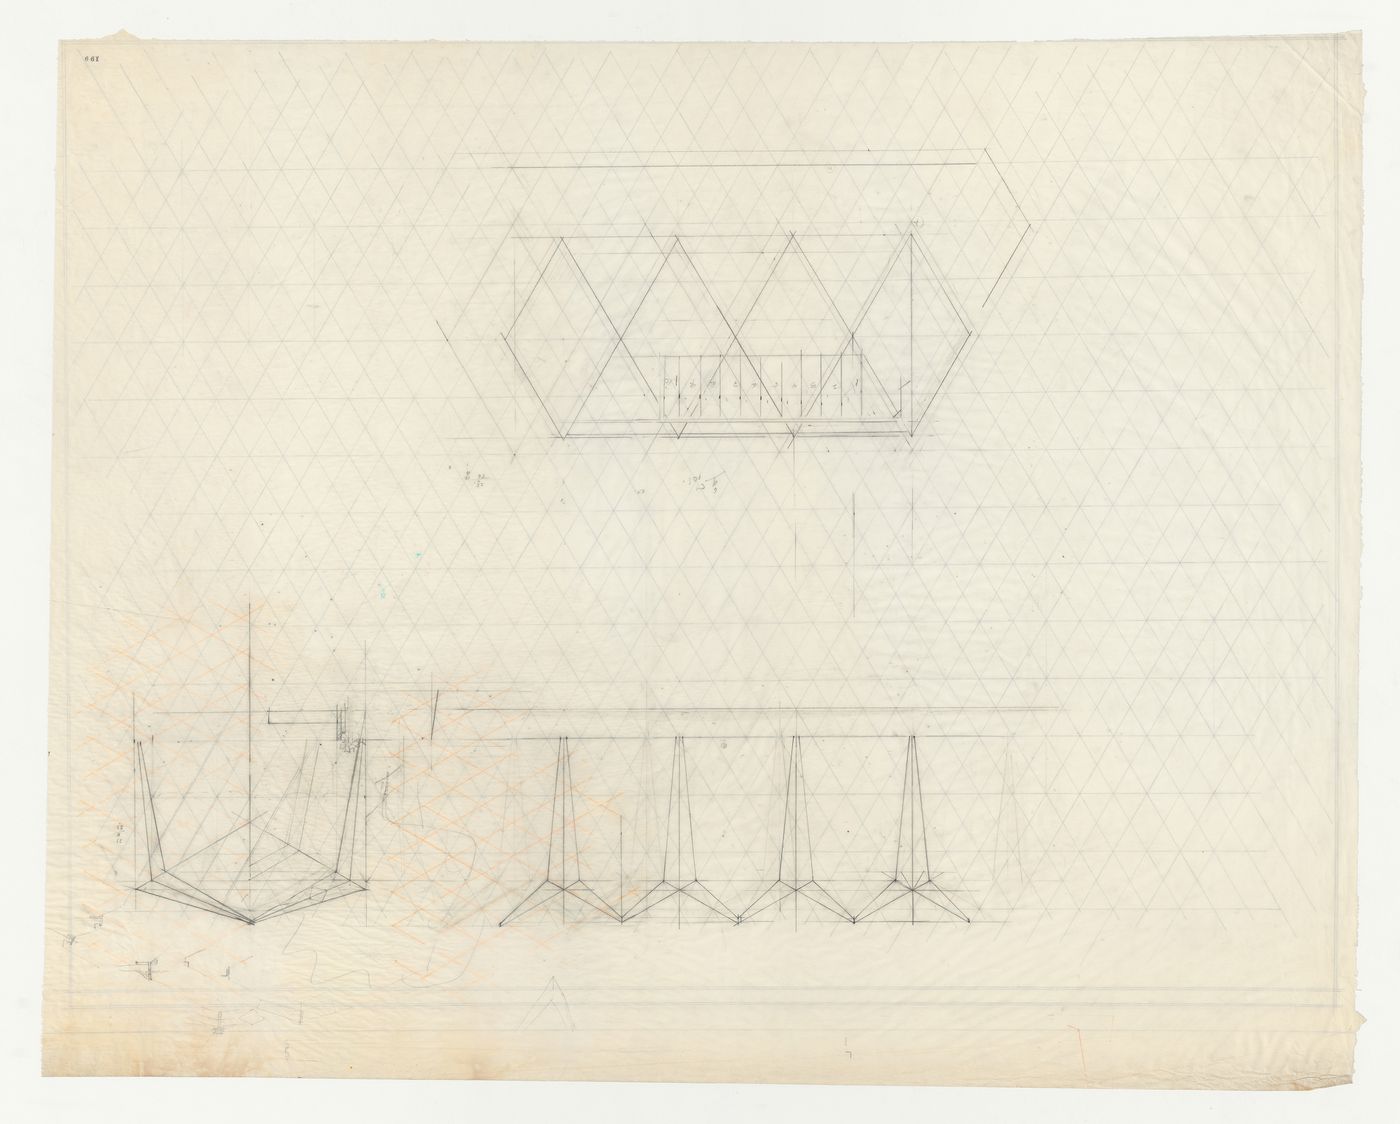 Wayfarers' Chapel, Palos Verdes, California: Elevation, section and plan developed on an equilateral paralellogram grid, with sketches for trusses and truss joints